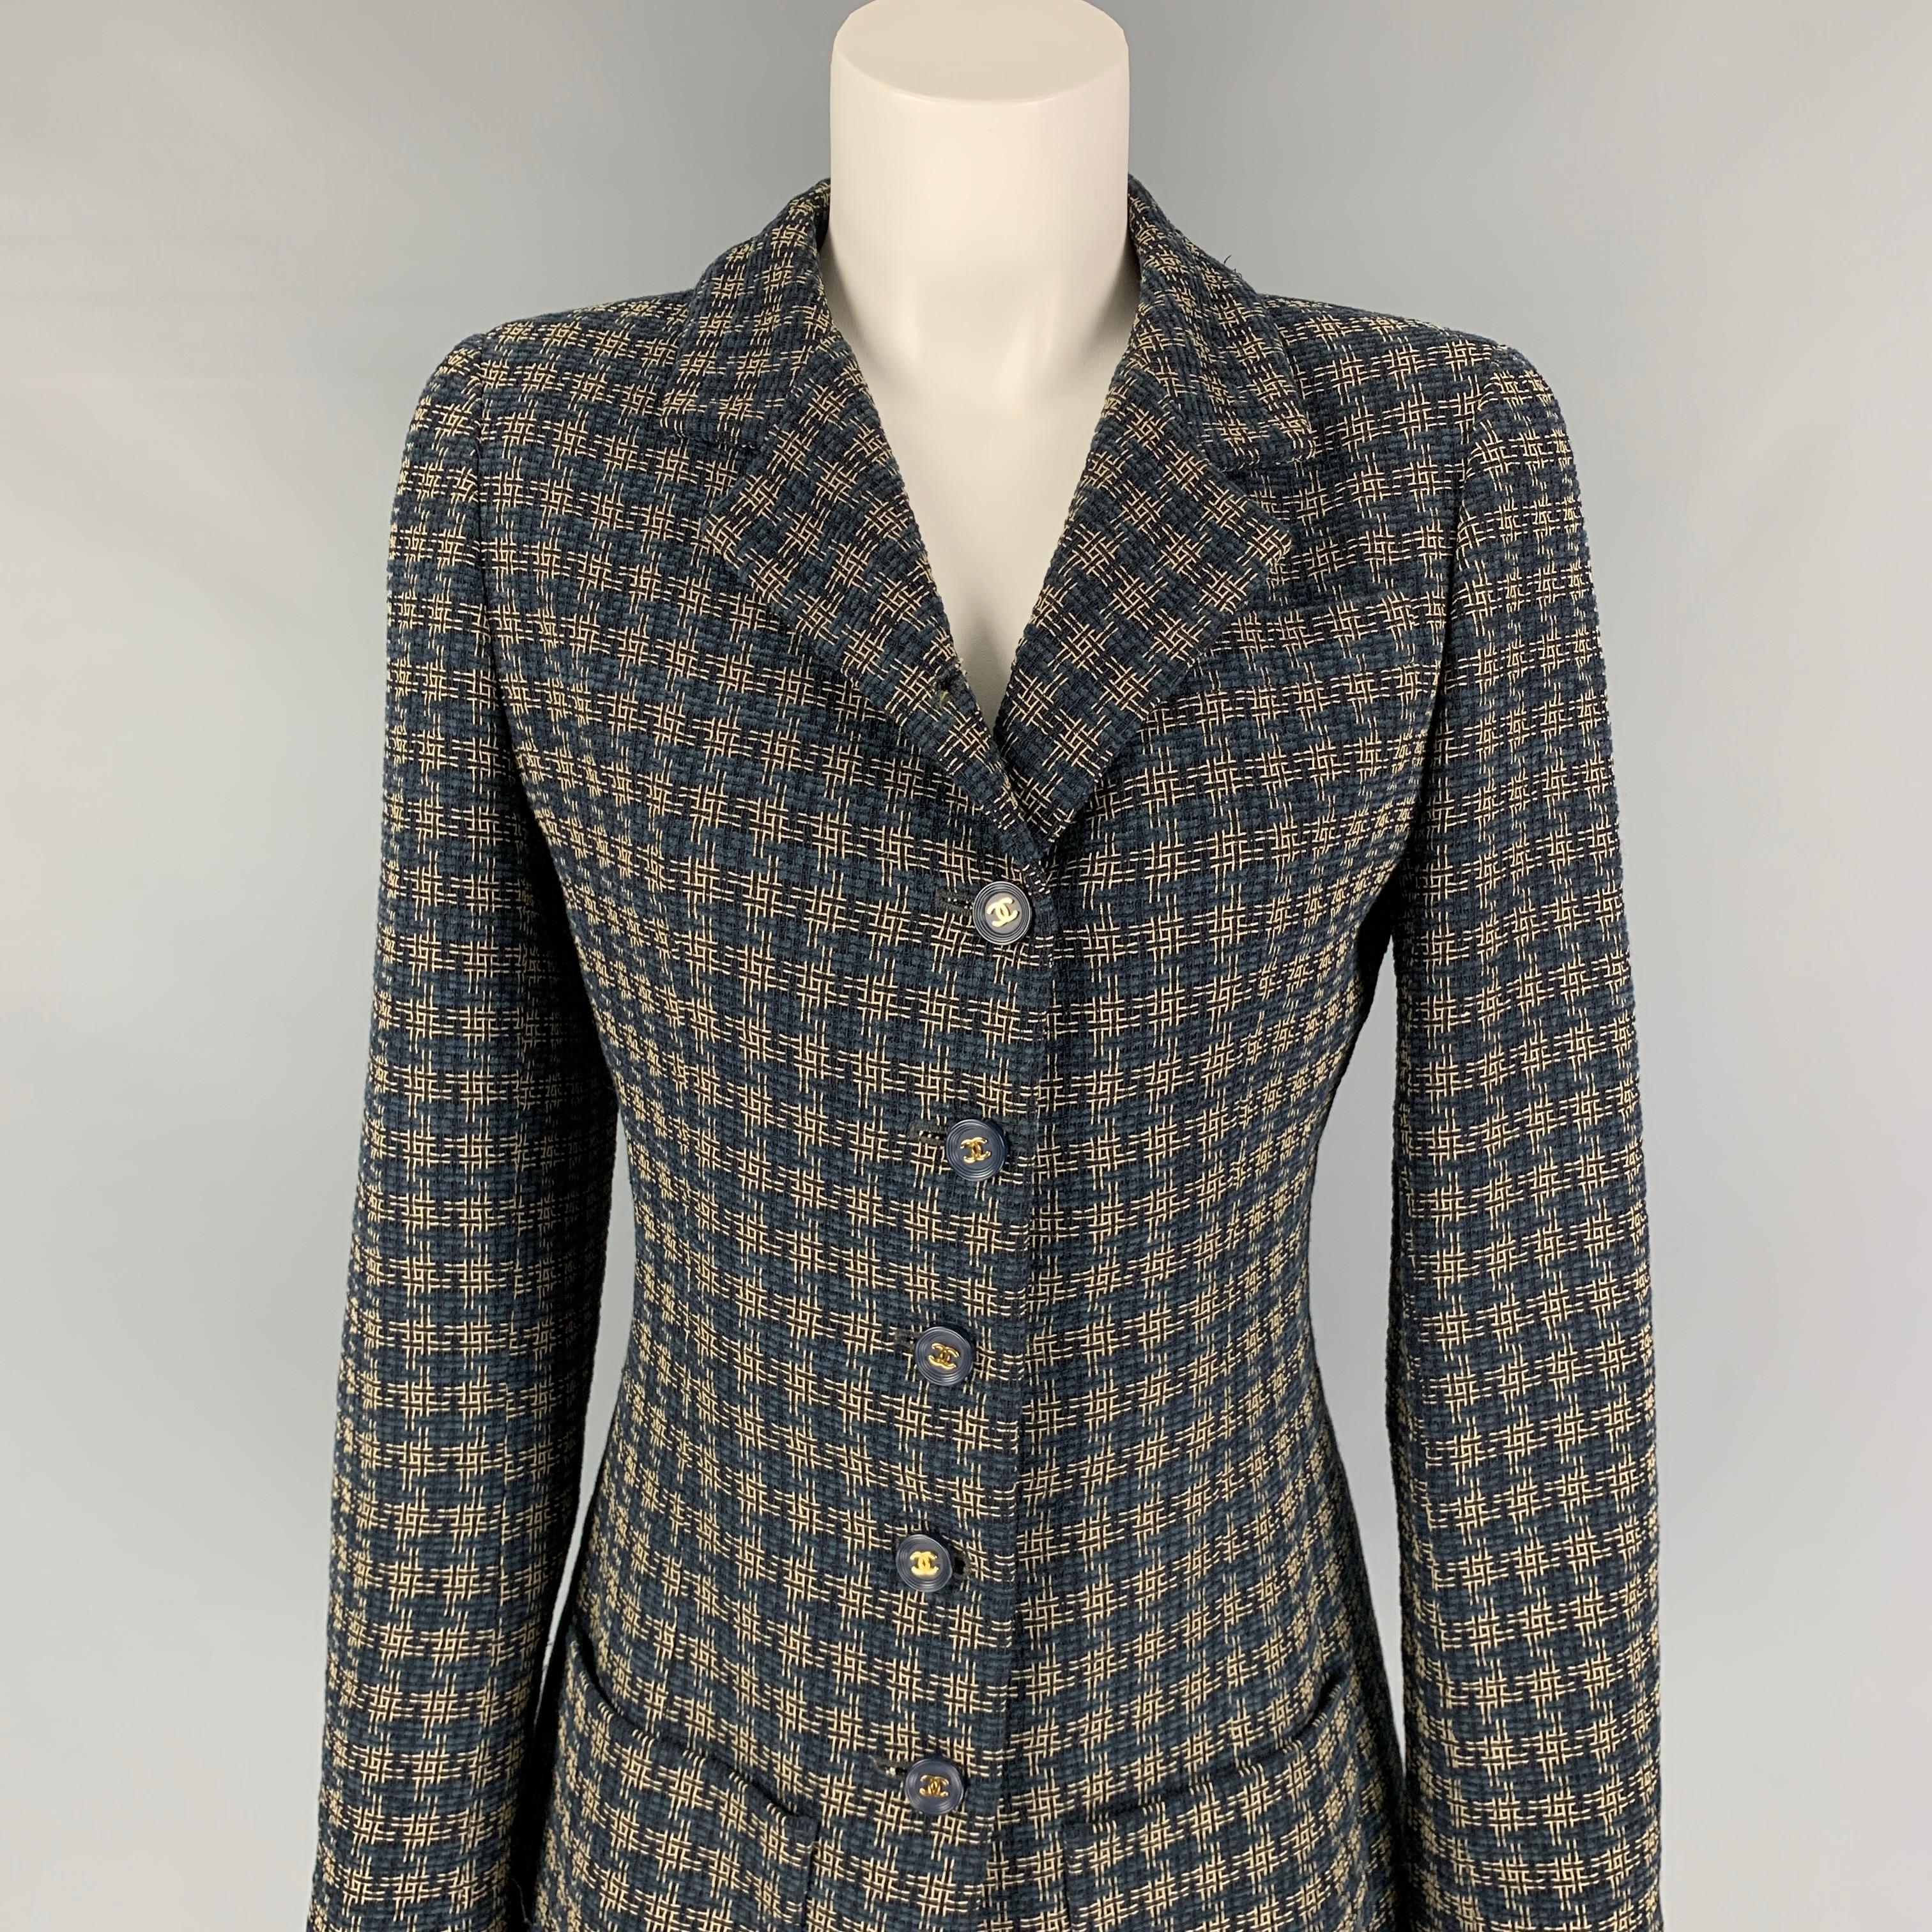 Vintage CHANEL jacket comes in a navy & cream checkered wool blend with a full liner featuring a notch lapel, patch pockets, chanel logo buttons, and a buttoned closure. Made in France. 

Very Good Pre-Owned Condition.
Marked: